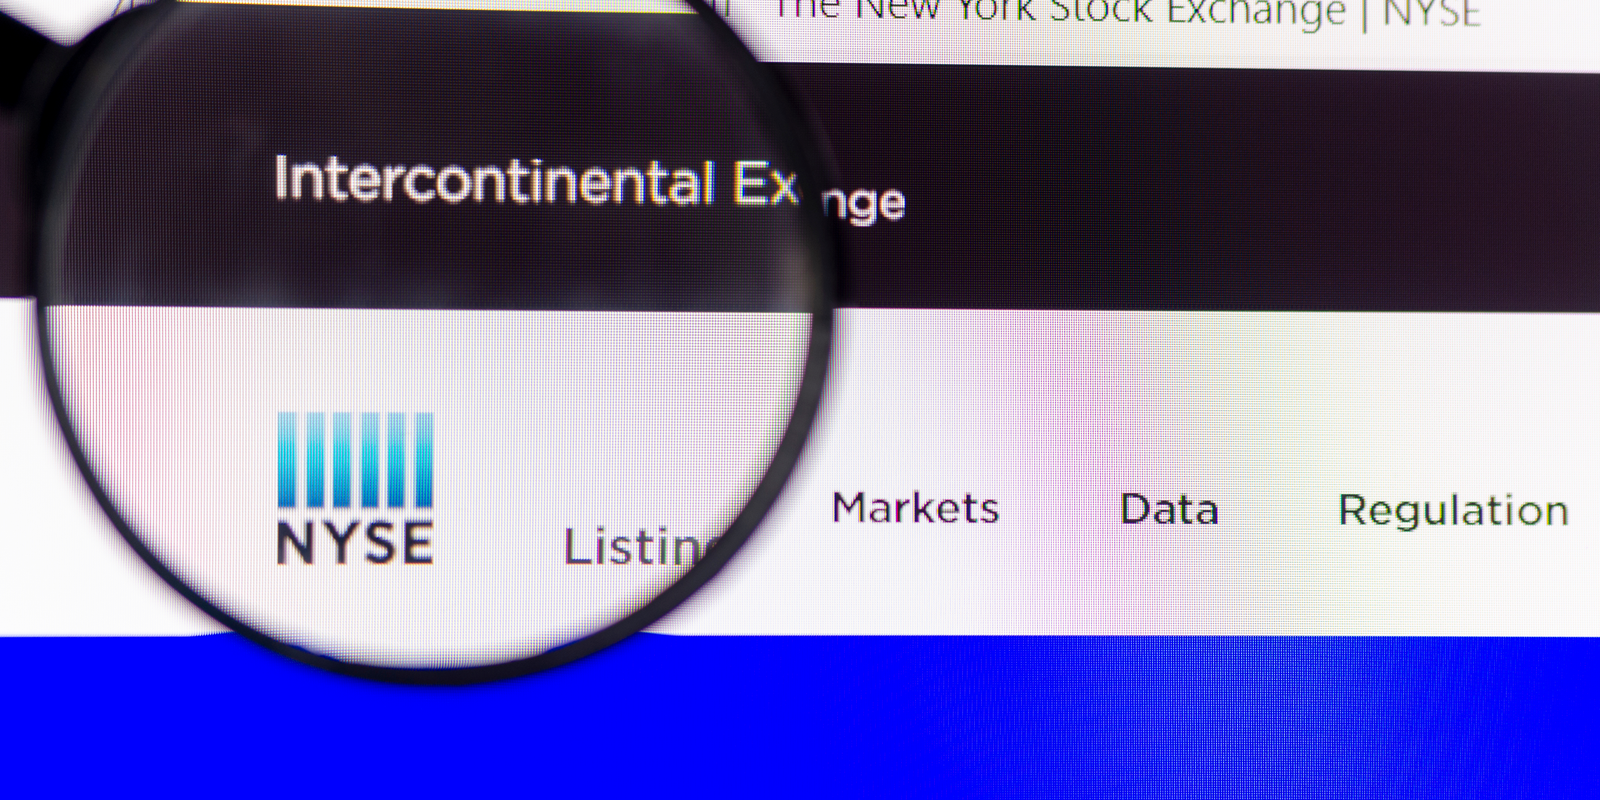 Not Just Ebay, NYSE Owner Intercontinental Exchange Pushes Bakkt to Retail With Latest Acquisition